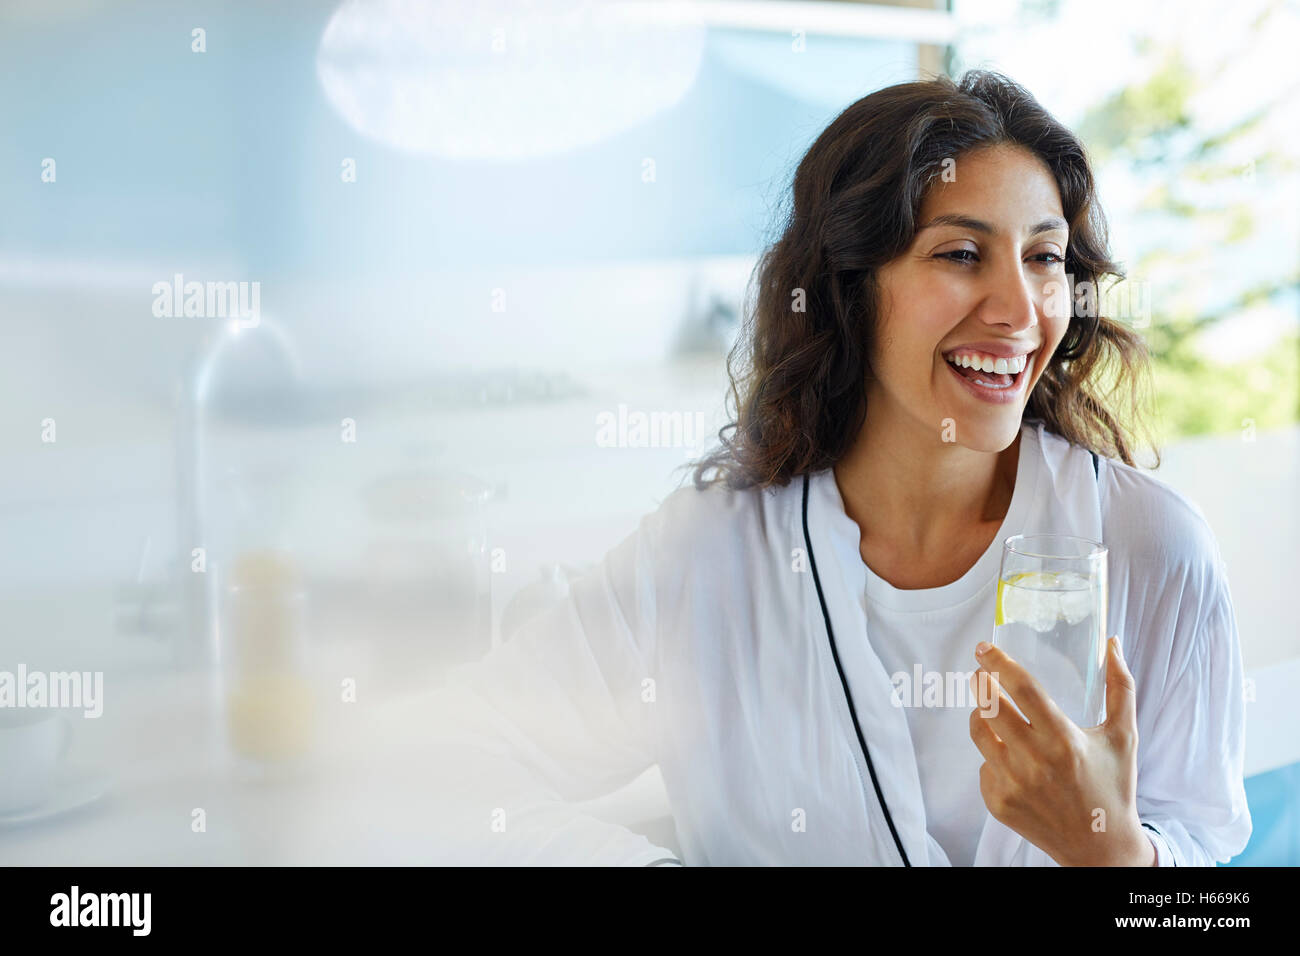 Laughing woman in bathrobe drinking water Banque D'Images